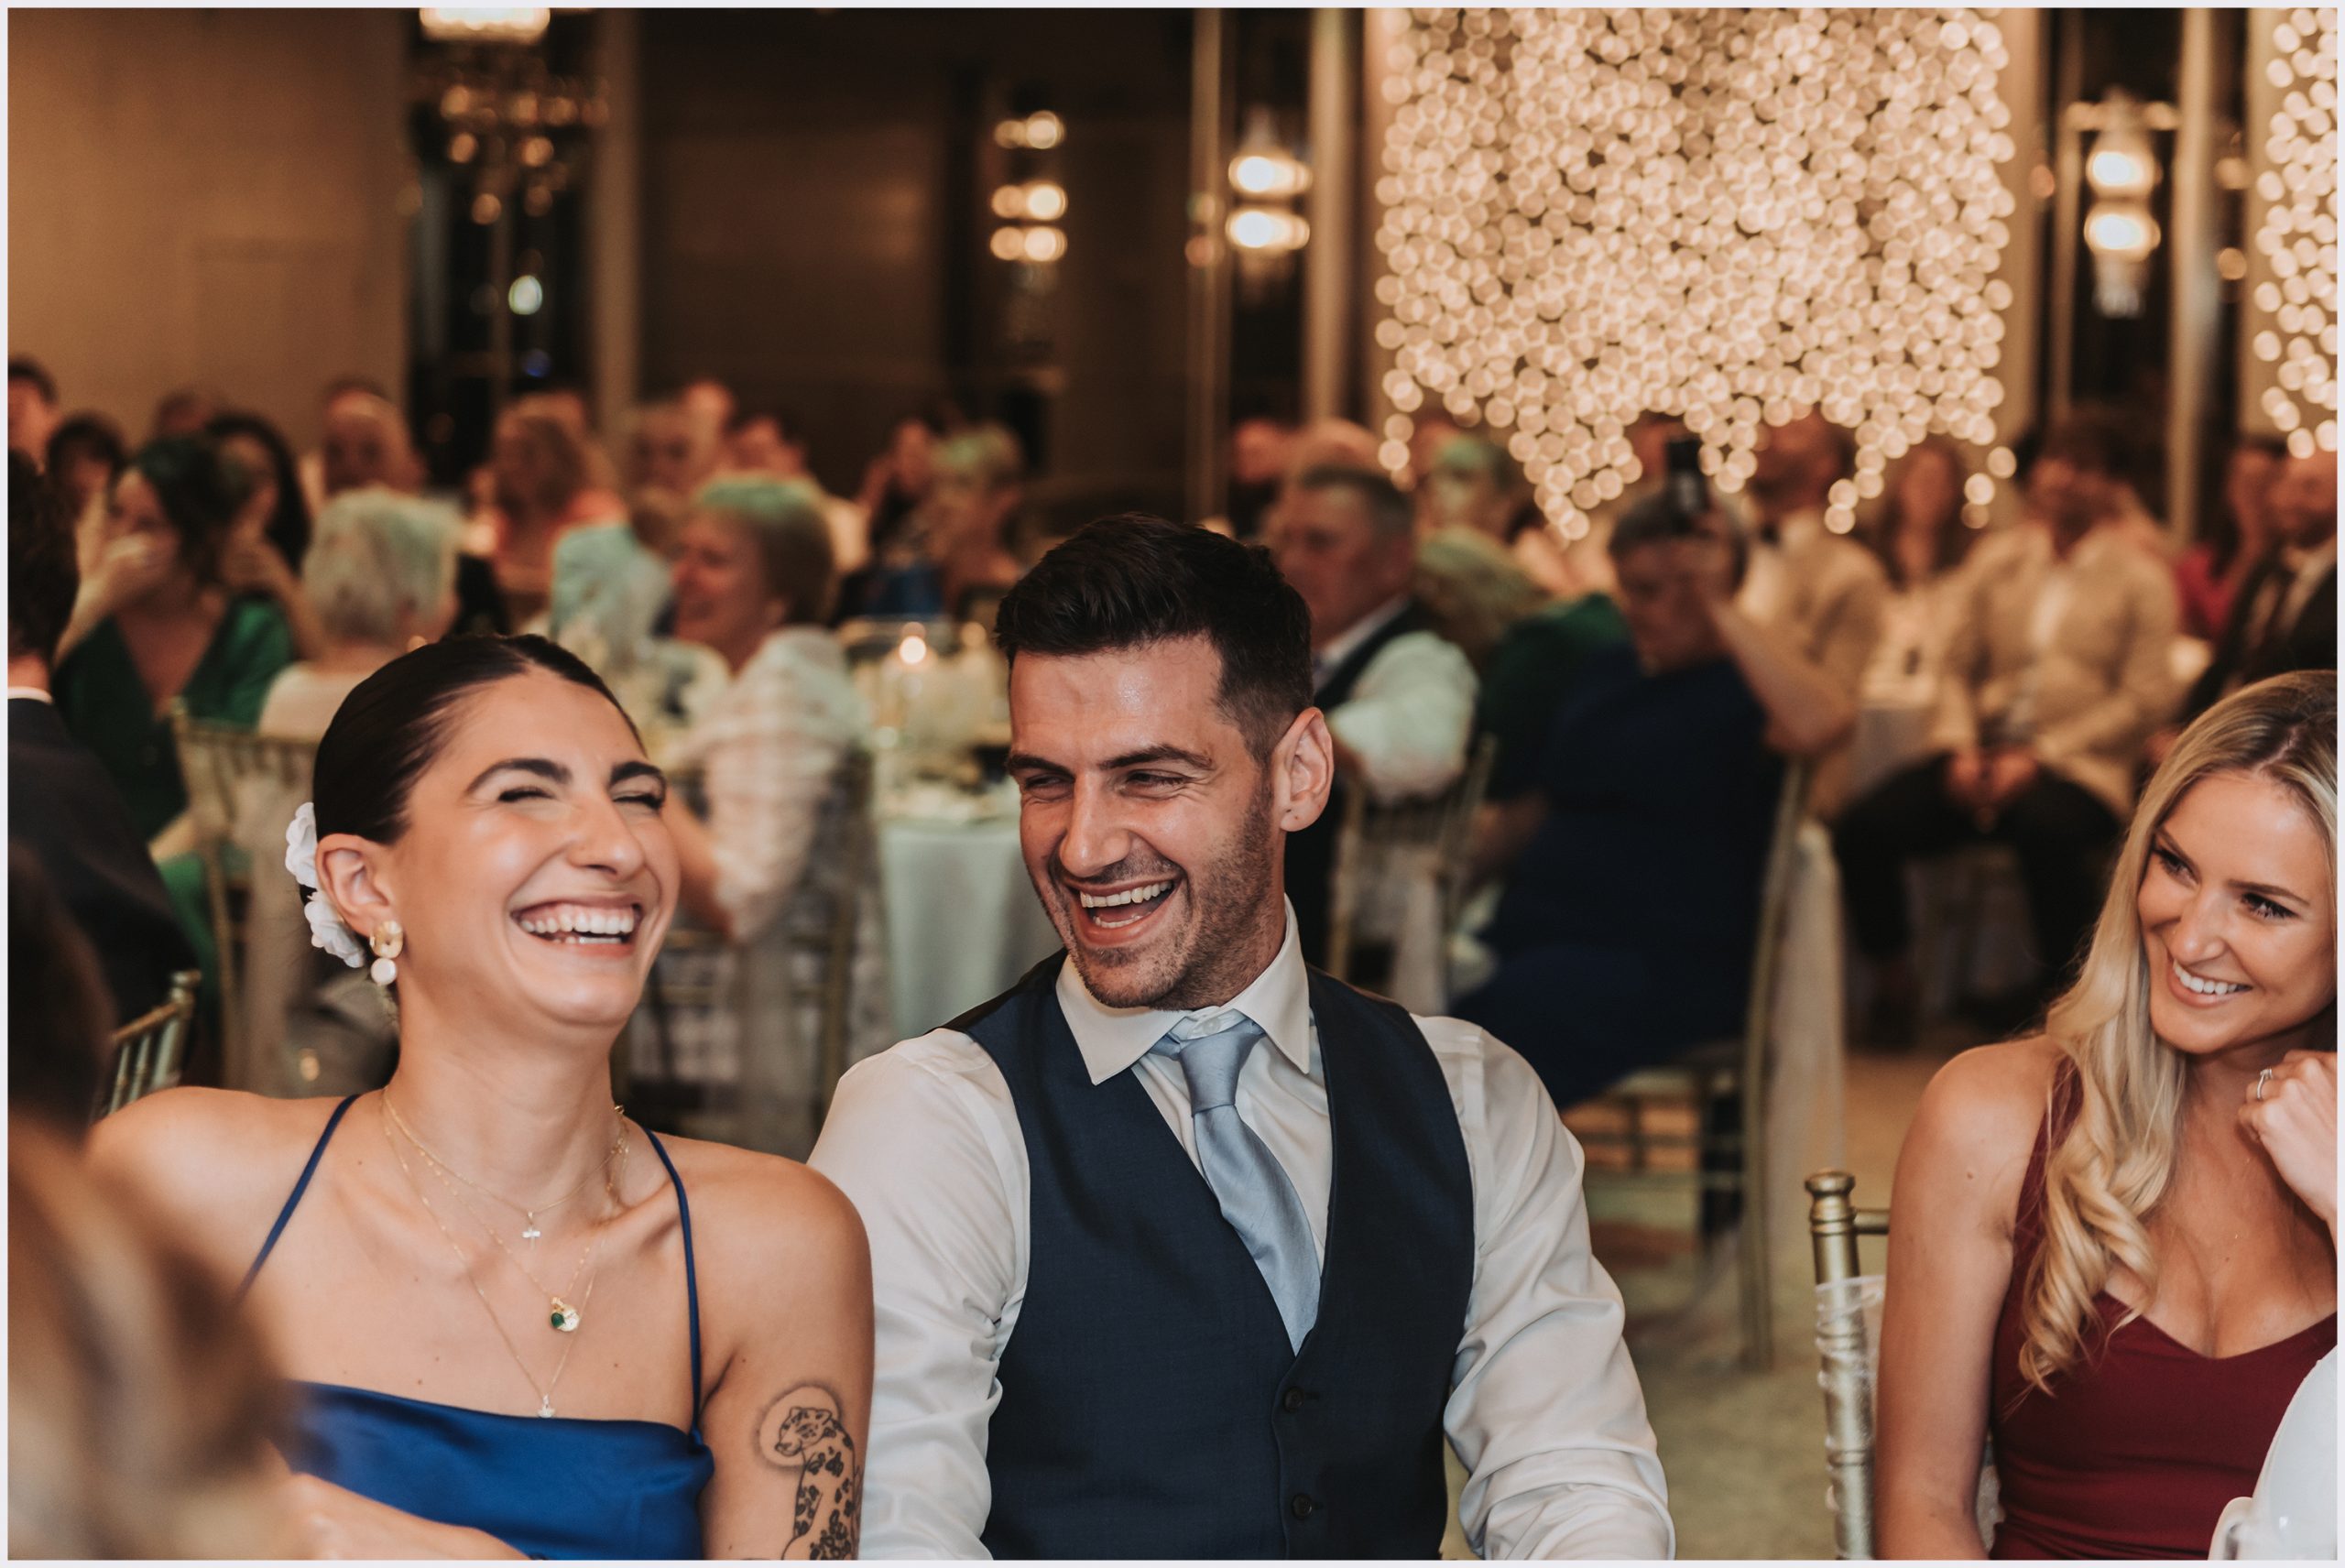 Guests laughing while the speeches are read